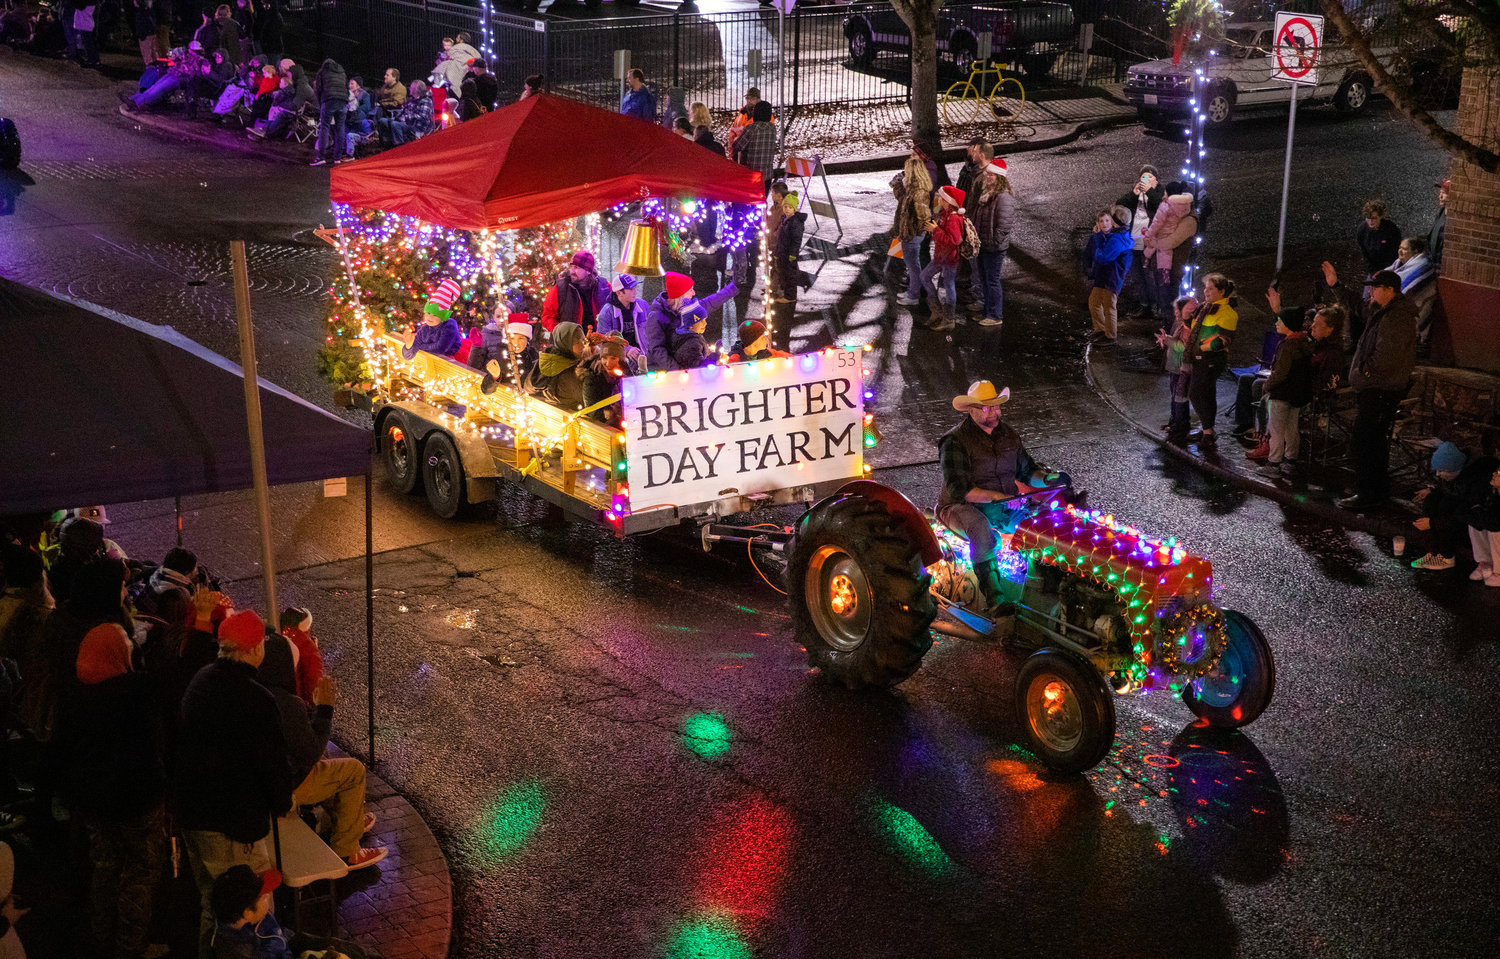 Paradegoers wave and record The Brighter Day Farm float as it rolls through downtown Centralia Saturday night during the Lighted Tractor Parade.